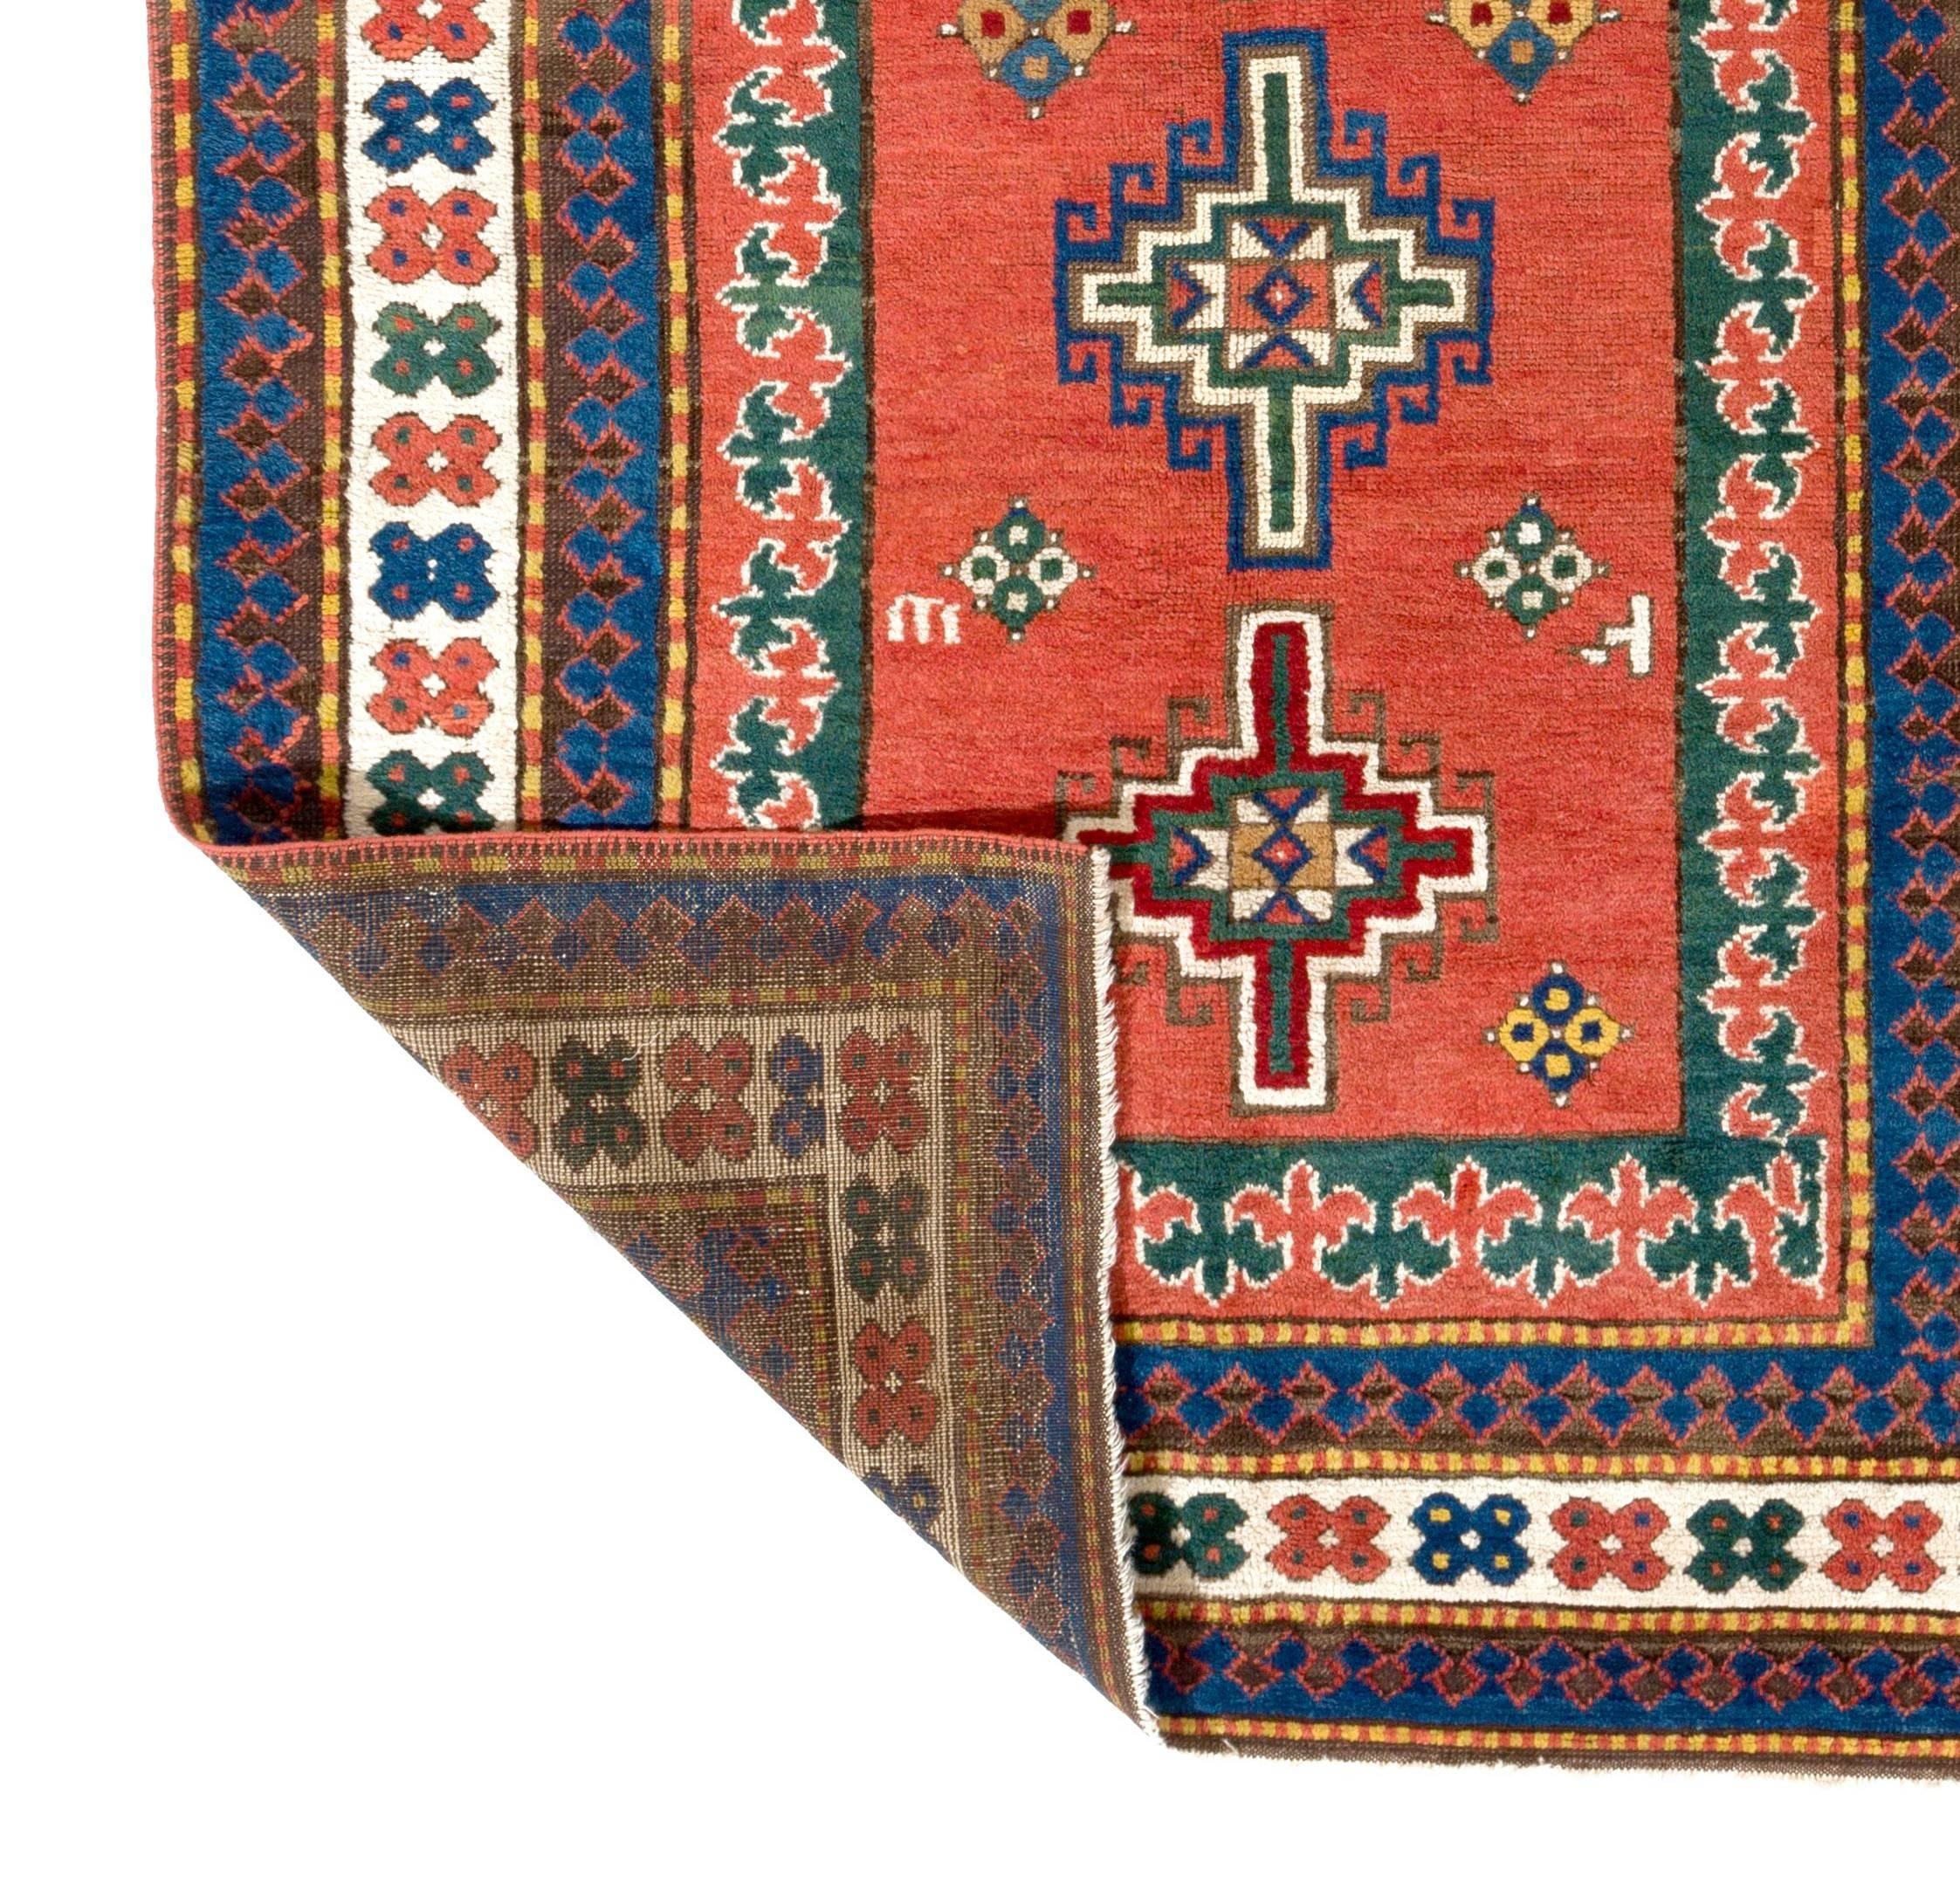 Antique Caucasian Kazak rug, circa 1875.
All wool and natural dyes. Very good condition. Sturdy and as clean as a brand new rug (deep washed professionally). Measures:  4'3